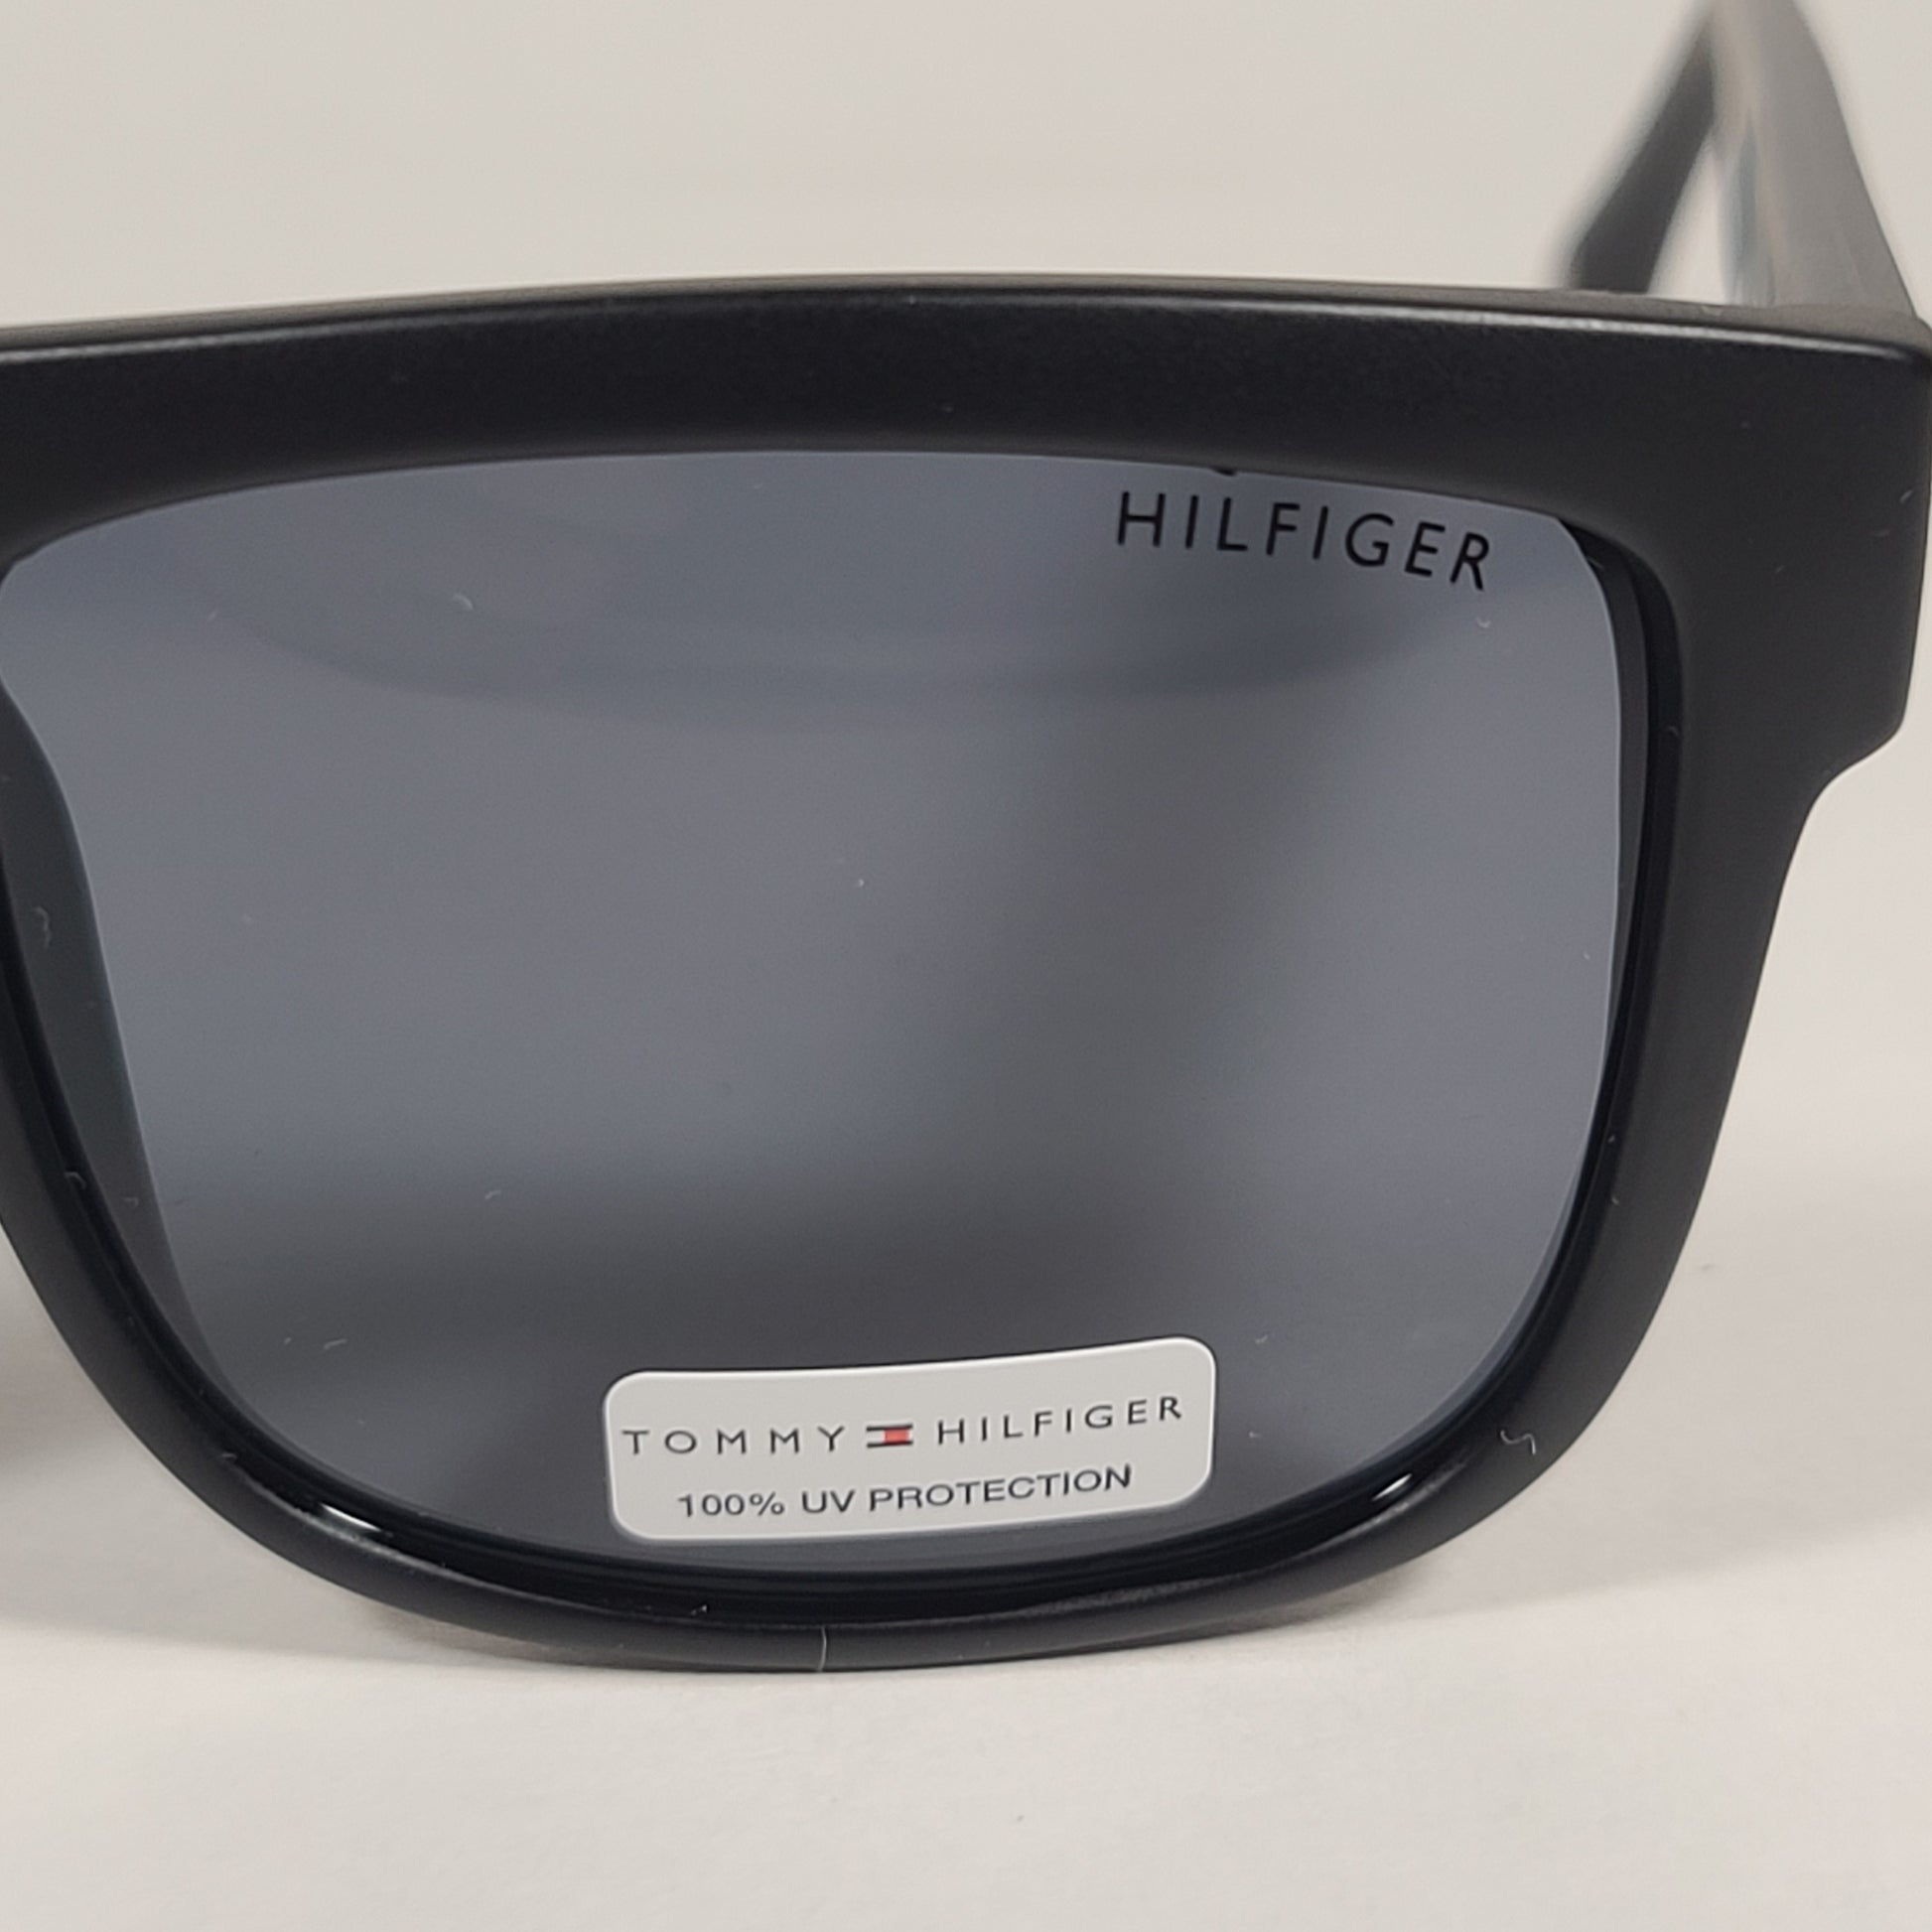 Tommy Hilfiger Wolf Square Sunglasses Matte Black Gray Tinted Lens WOLF MP OU562 - Sunglasses